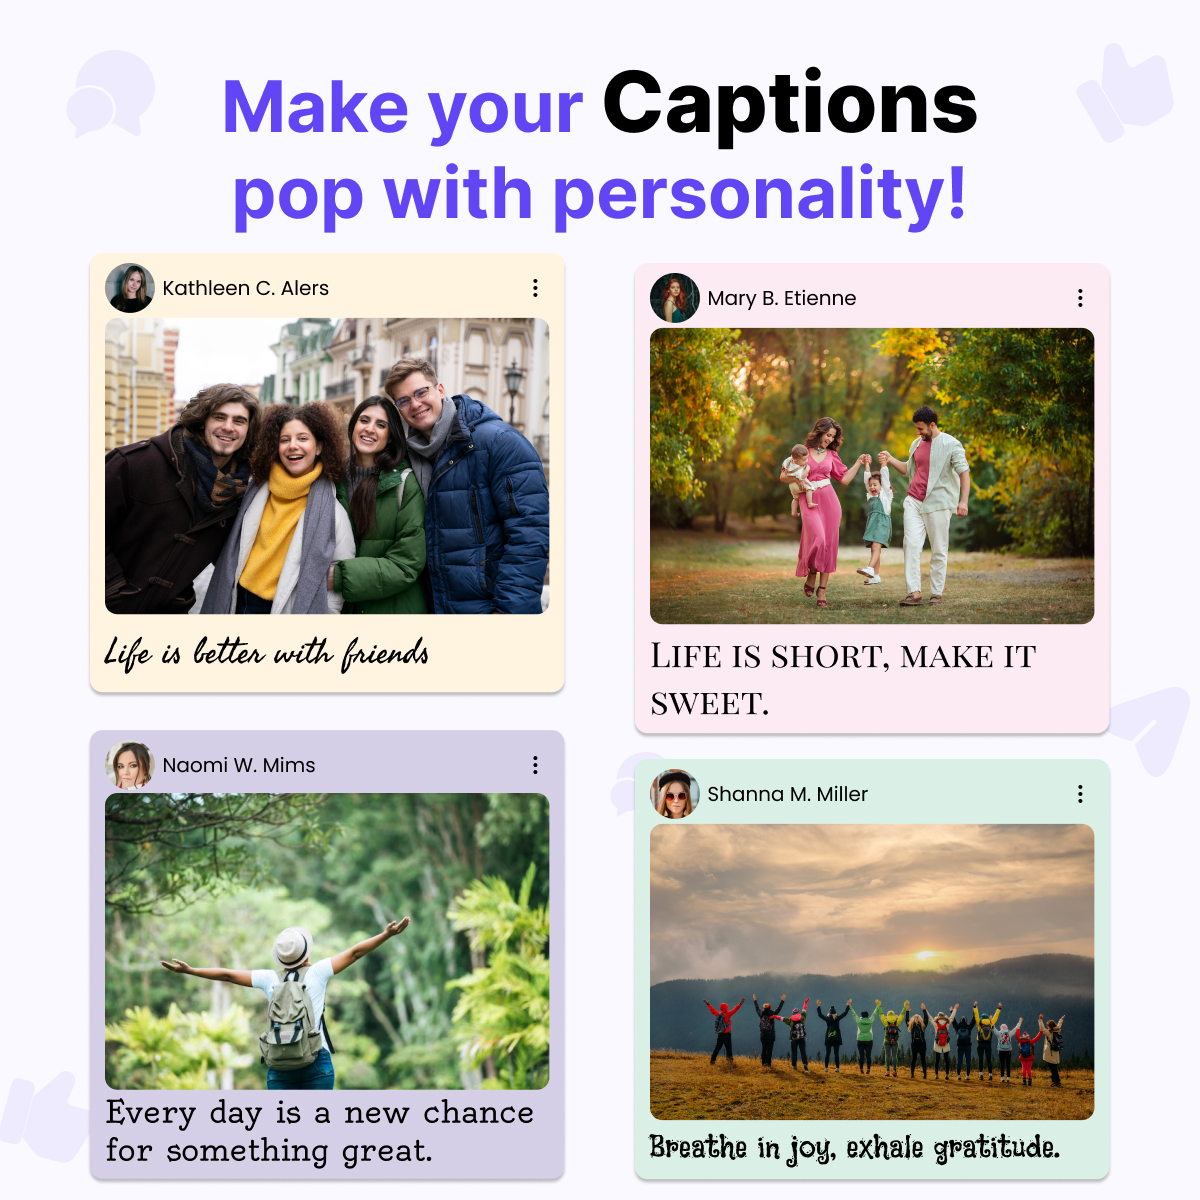 Unleash your creativity with the Photo keyboard app - the trendiest way to express yourself in super cool fonts! 
#photokeyboard #ExpressYourself #mobilekeyboard #fontkeyboard #fontart #fontdesign #fonts #keyboardlover #colorfulkeyboard #fancyfont #captionfonts #creativecaption